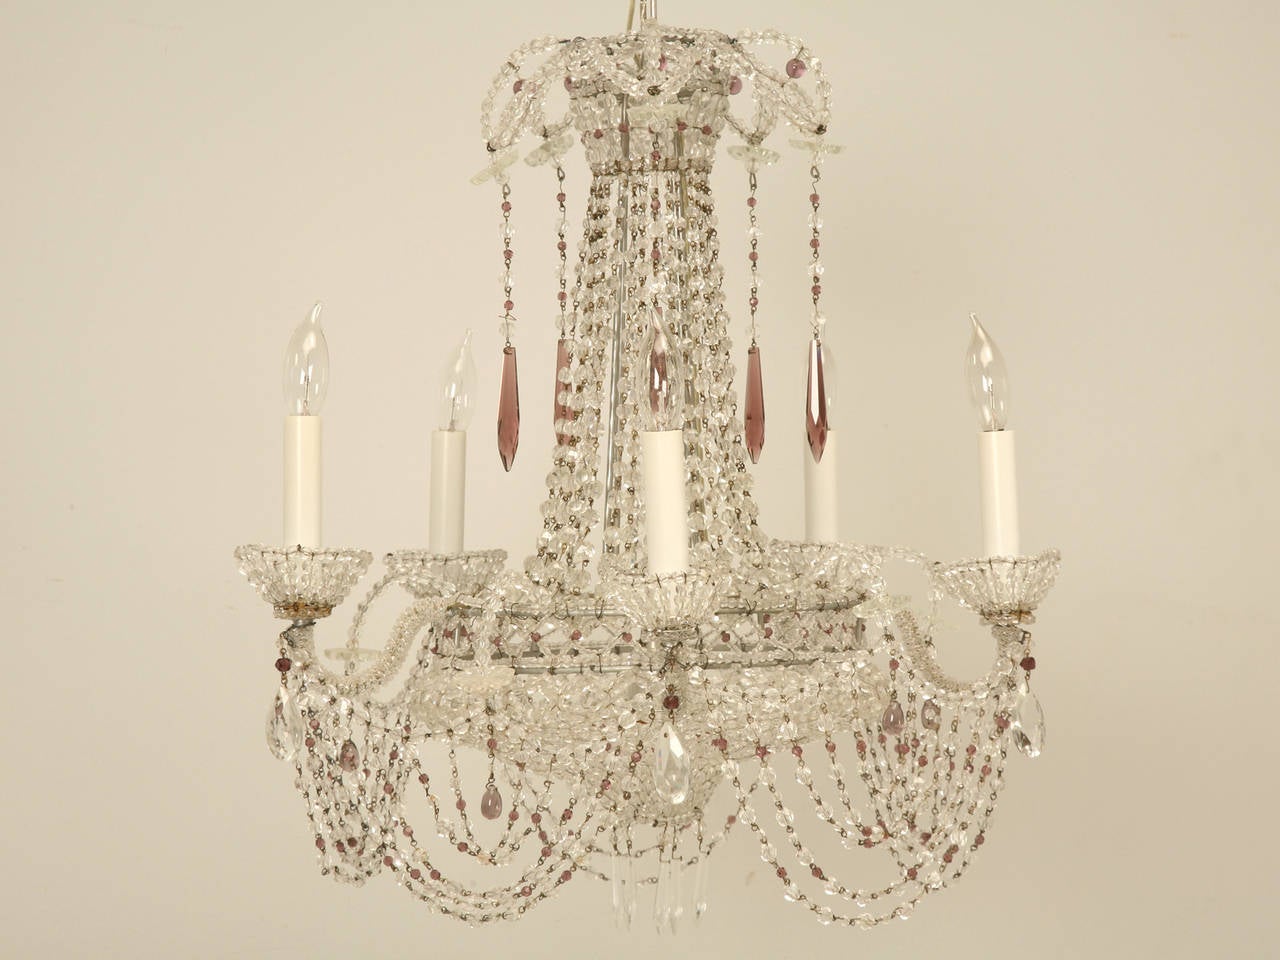 Vintage Italian Chandelier with matching silver-leafed canopy. Unequivocally the most heavily beaded light I have ever seen, even the Bobeches are made from Beads. These is just a hint of amethyst in the cut crystal drops, which could always be